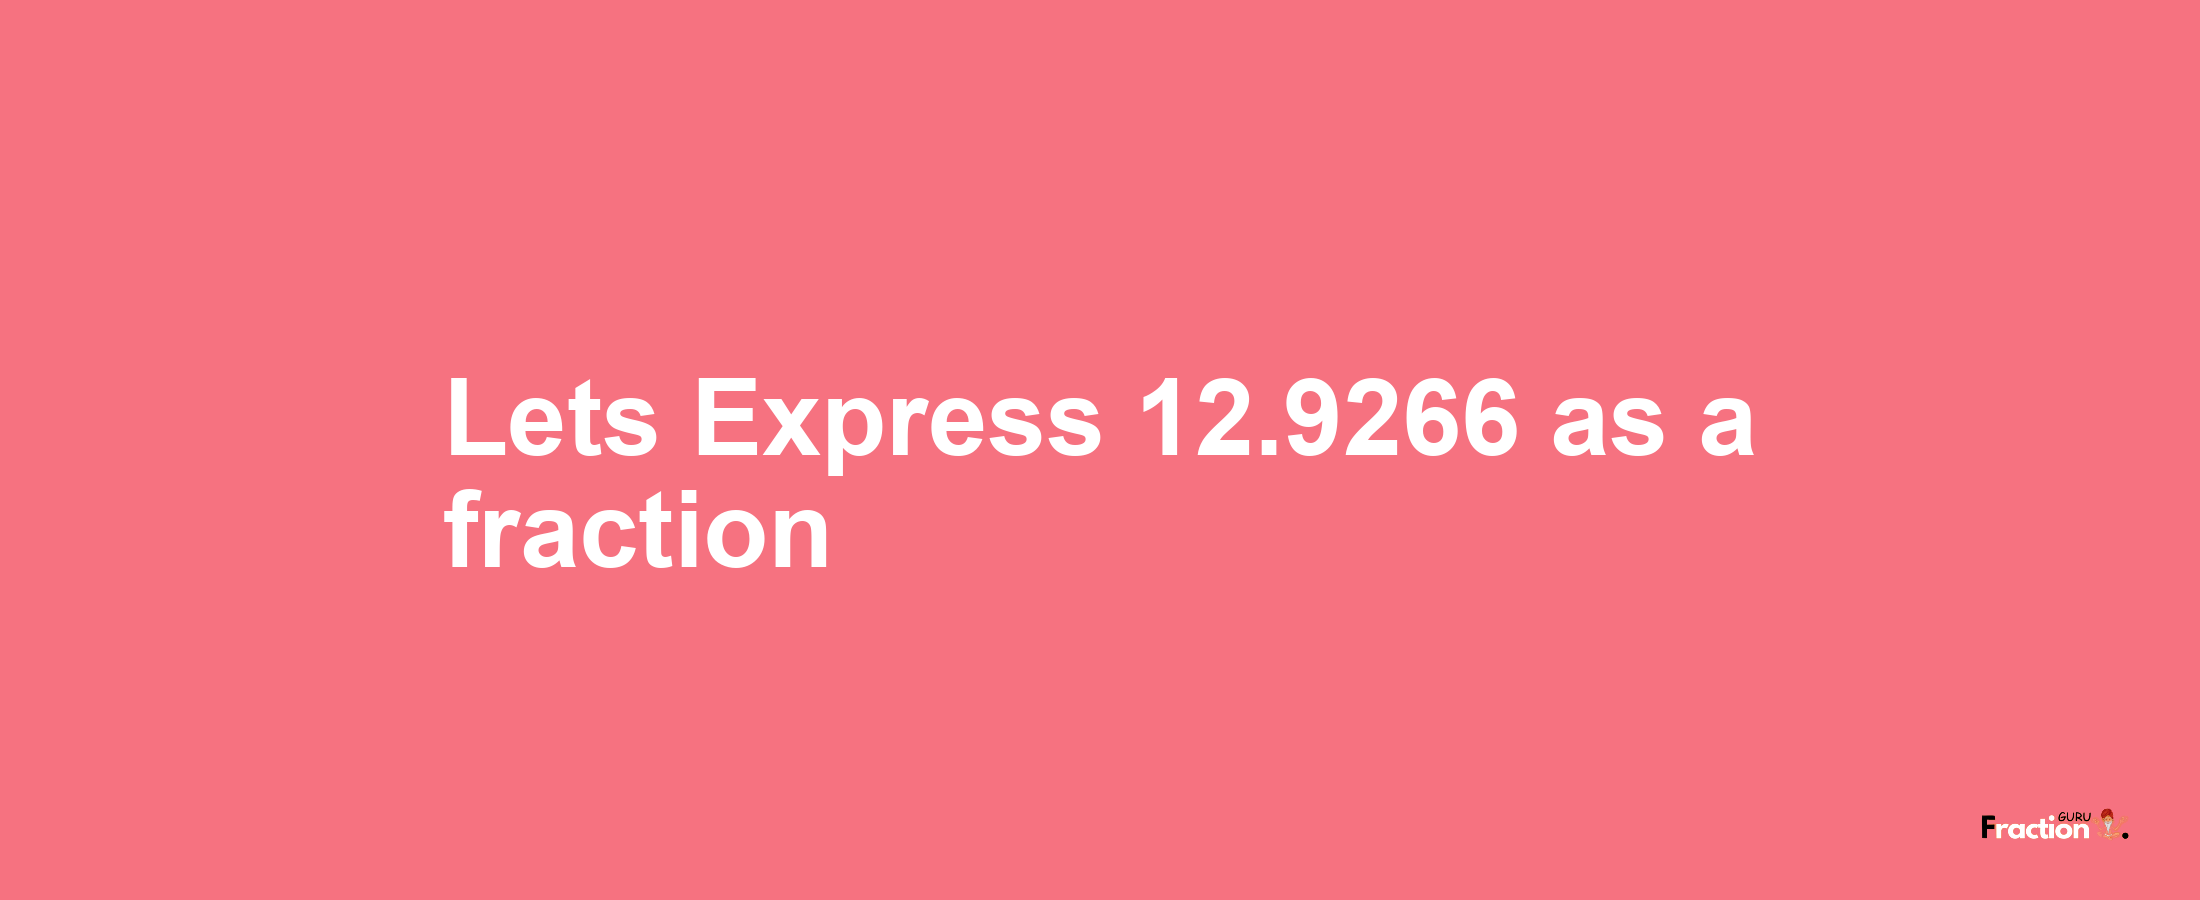 Lets Express 12.9266 as afraction